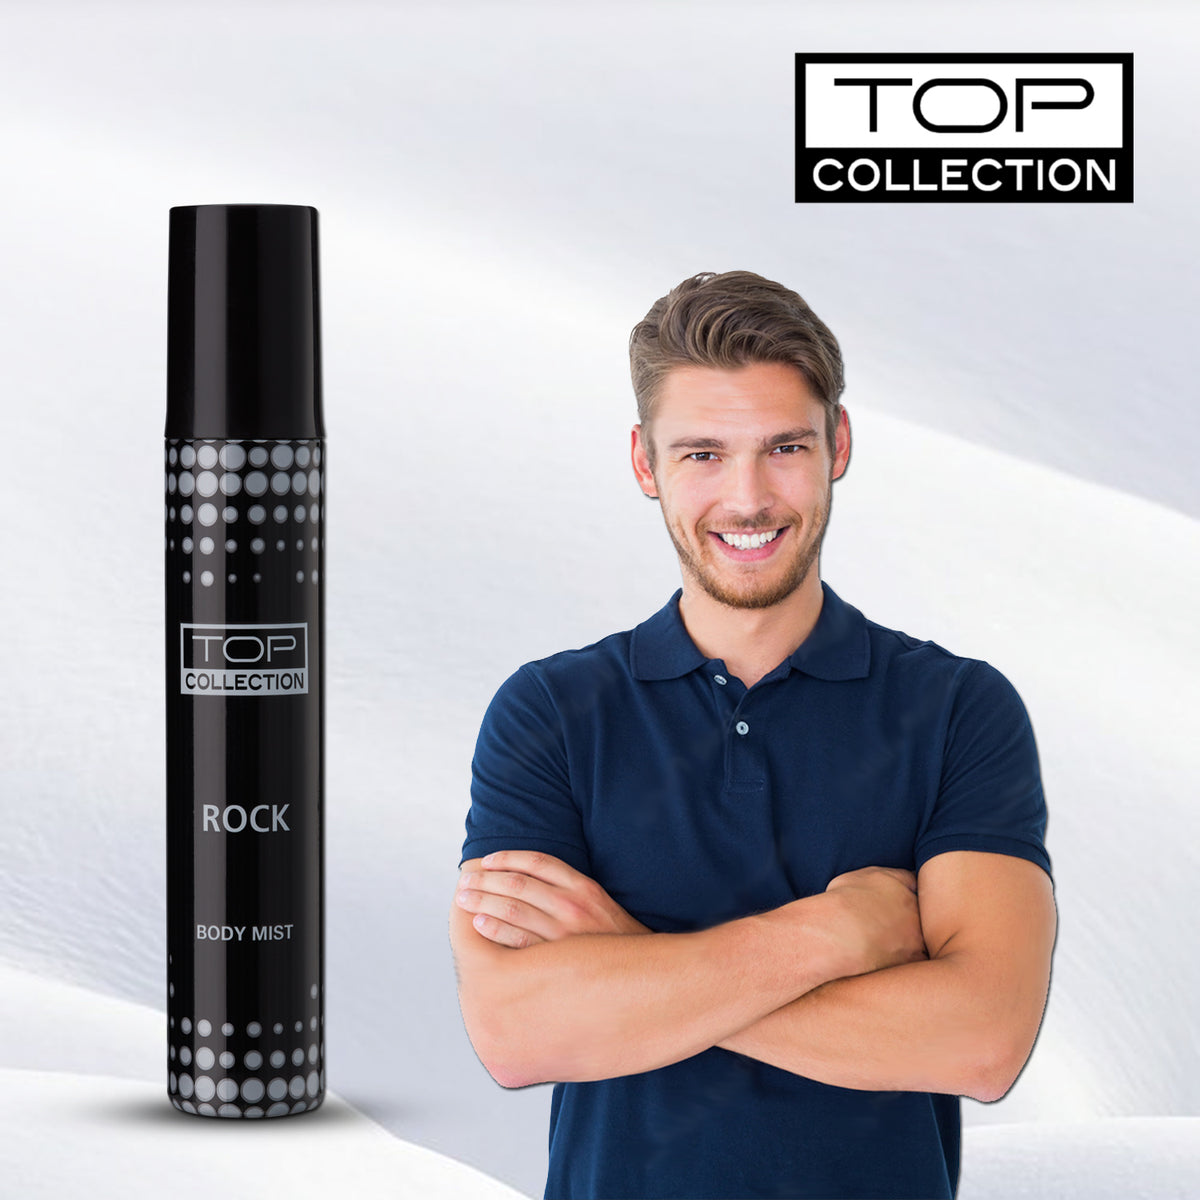 Top Collection Body Mist - Rock, 75ml